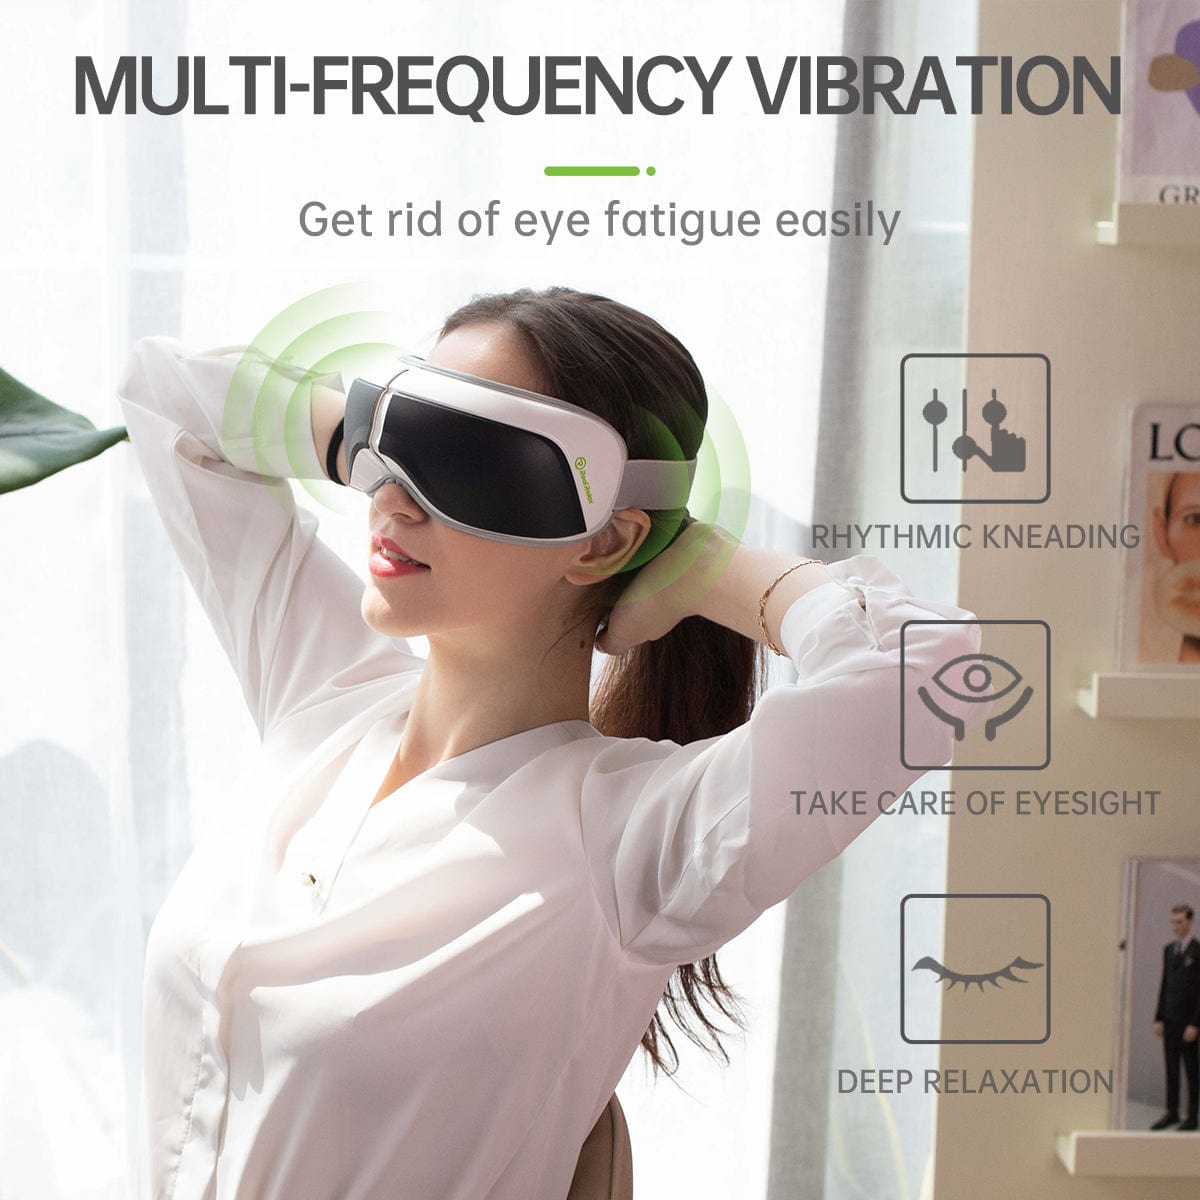 Real Relax notShow Real Relax Smart Electric Eye Massager with Heat Vibration  2